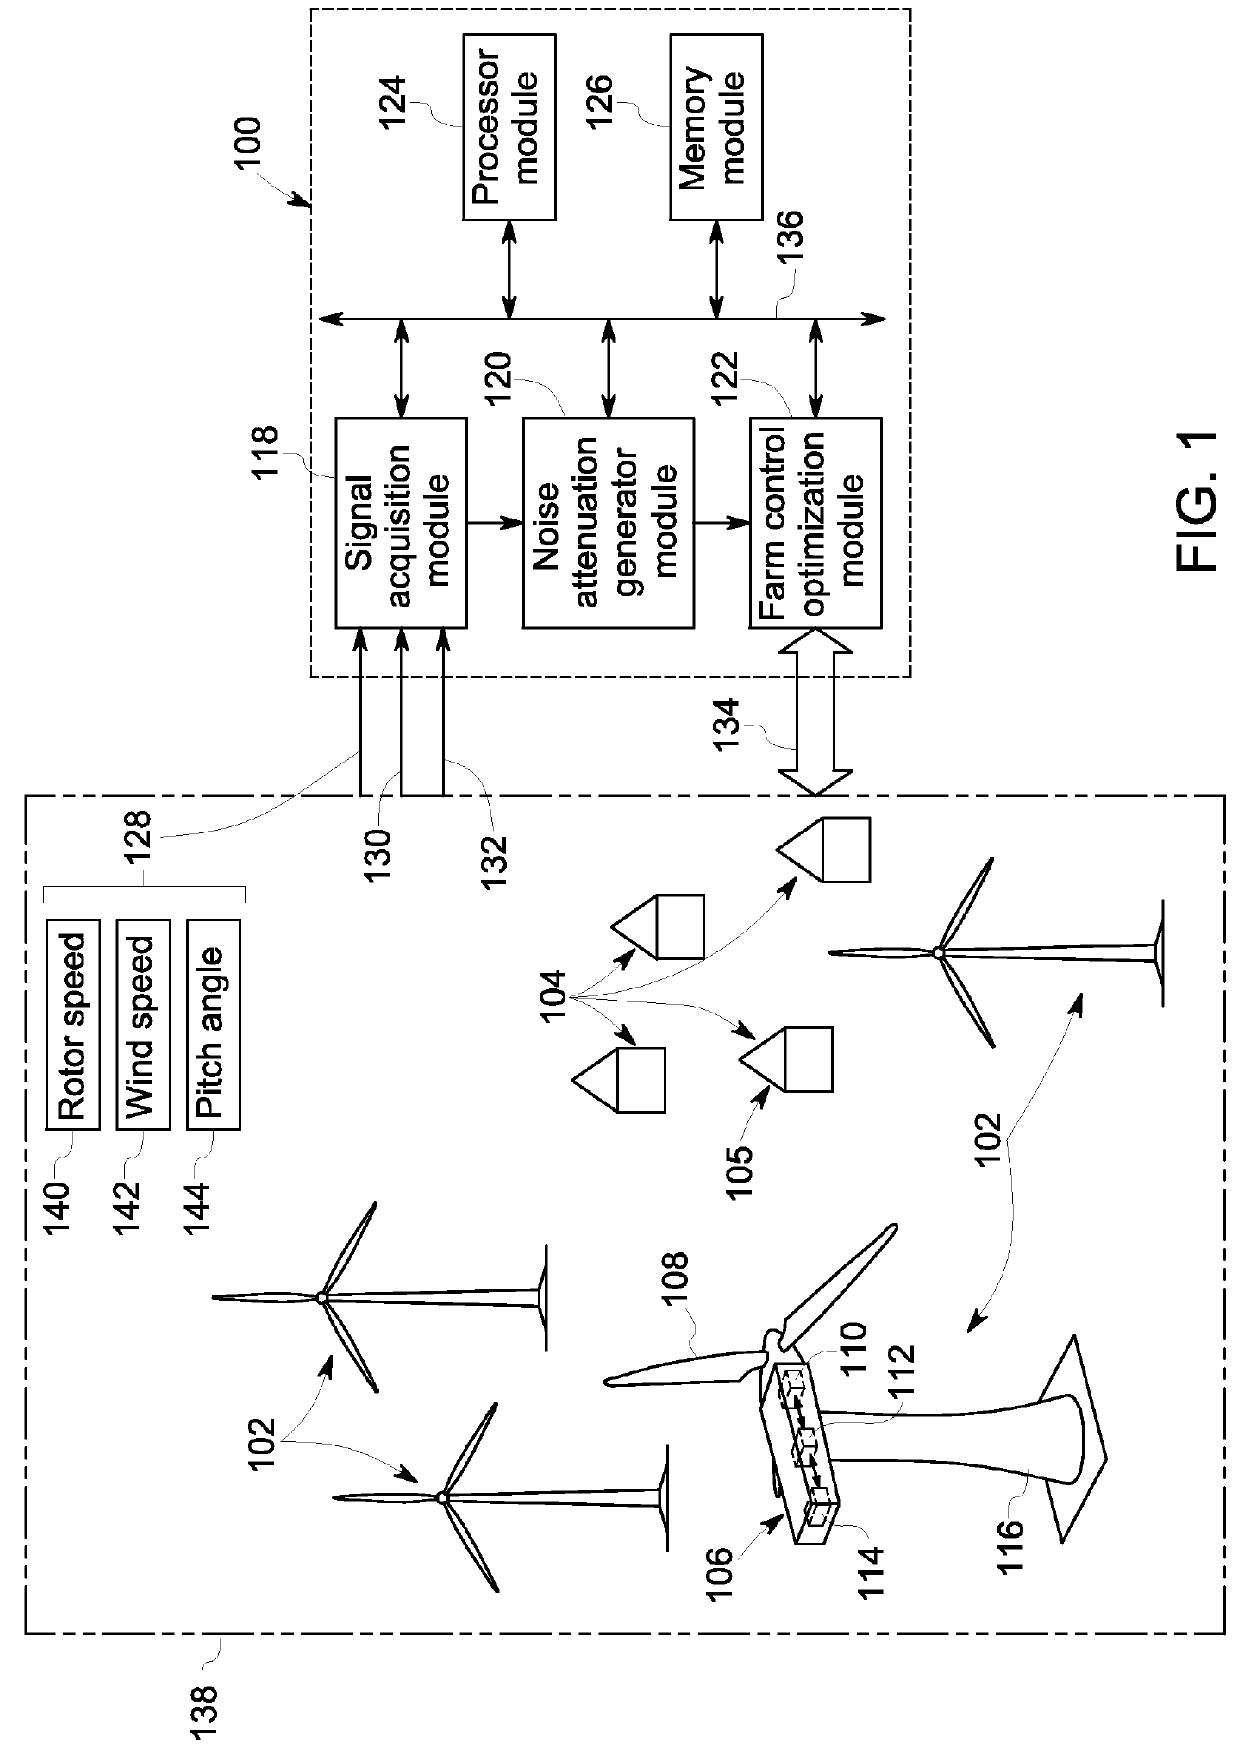 System and method for optimal operation of wind farms